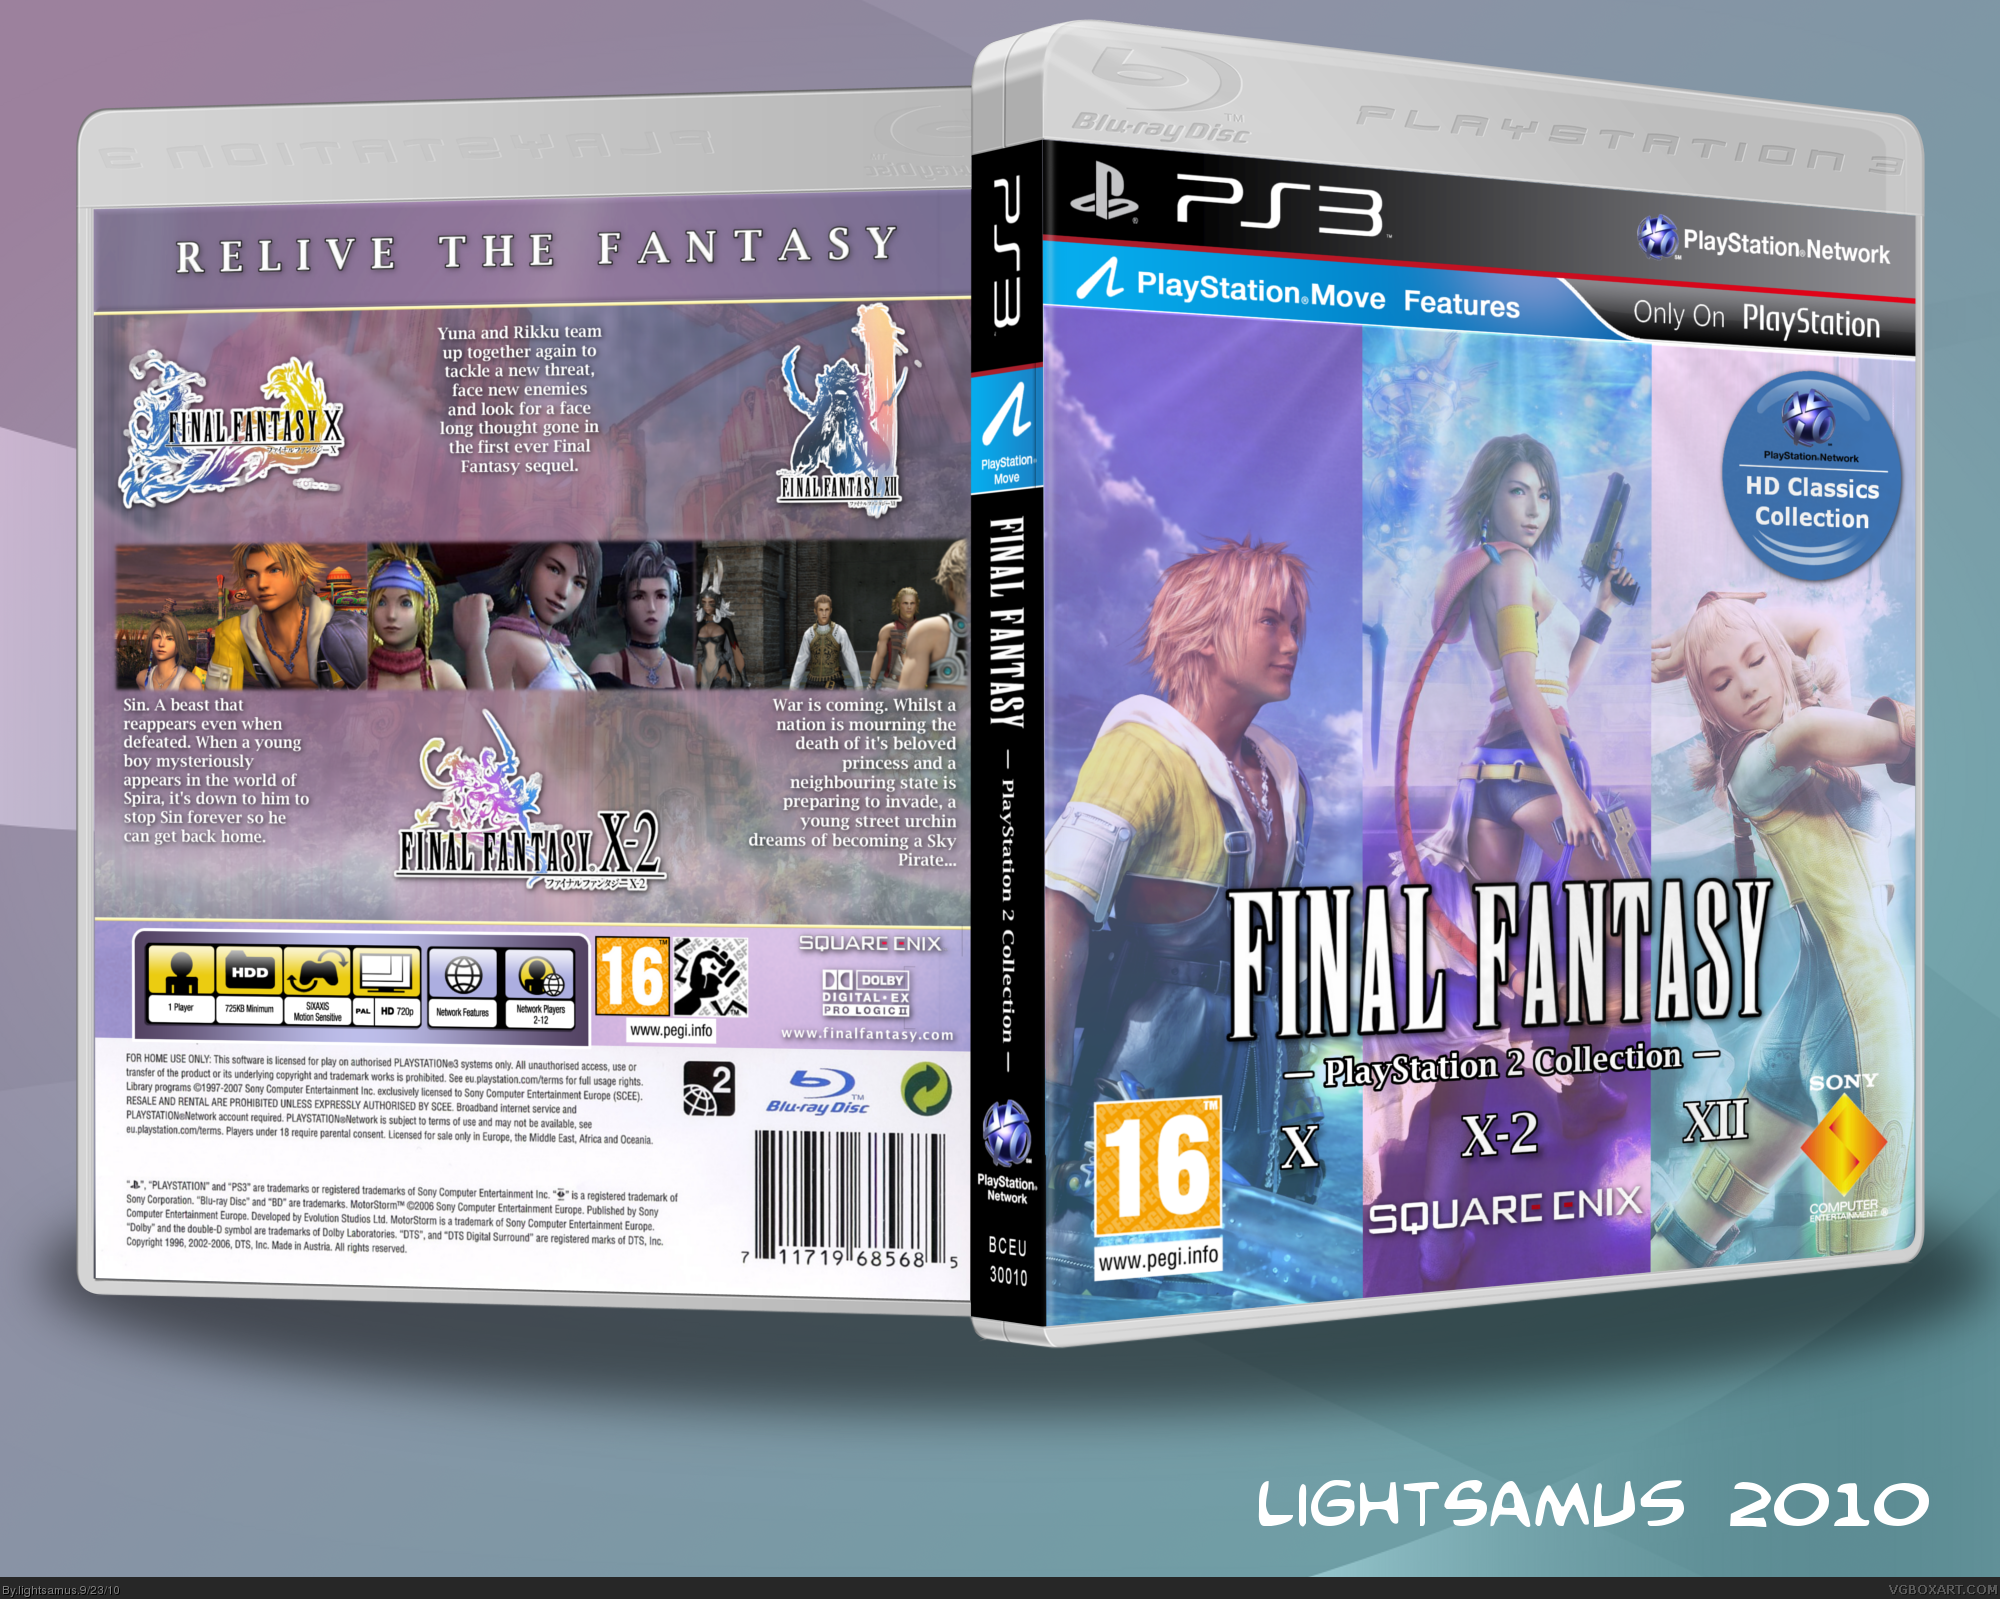 Final Fantasy - PlayStation 2 Collection box cover